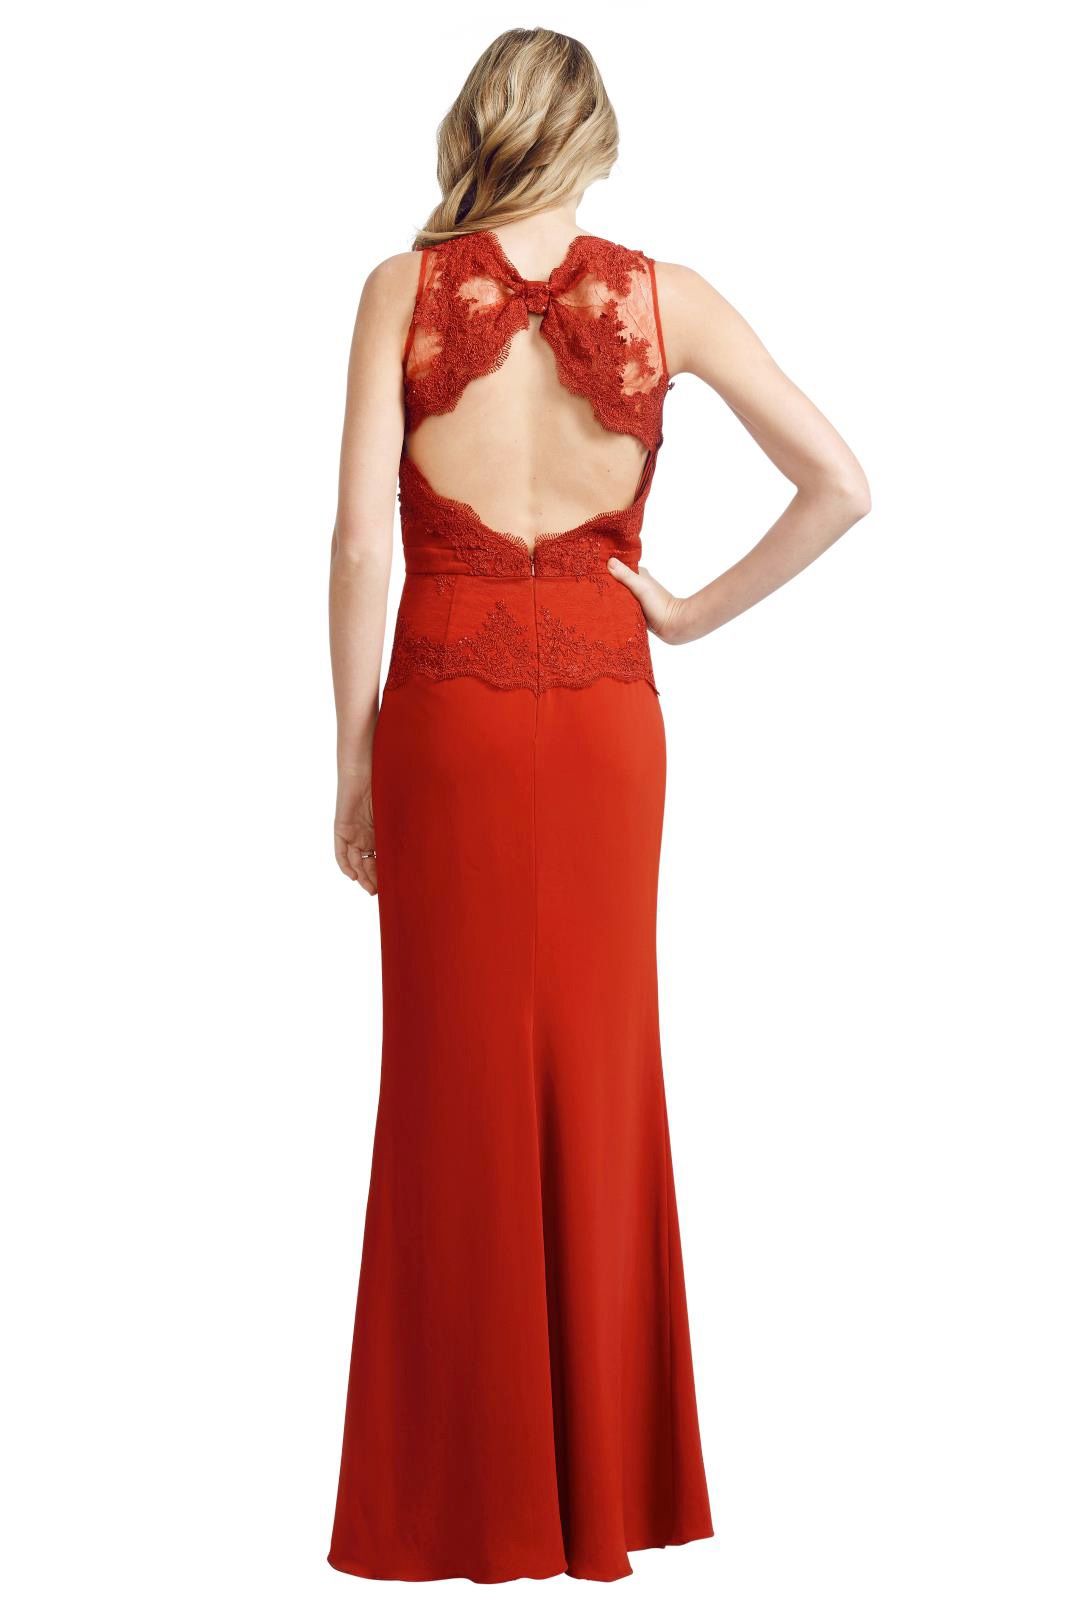 Badgley Mischka - Lace Open Gown - Red - Back